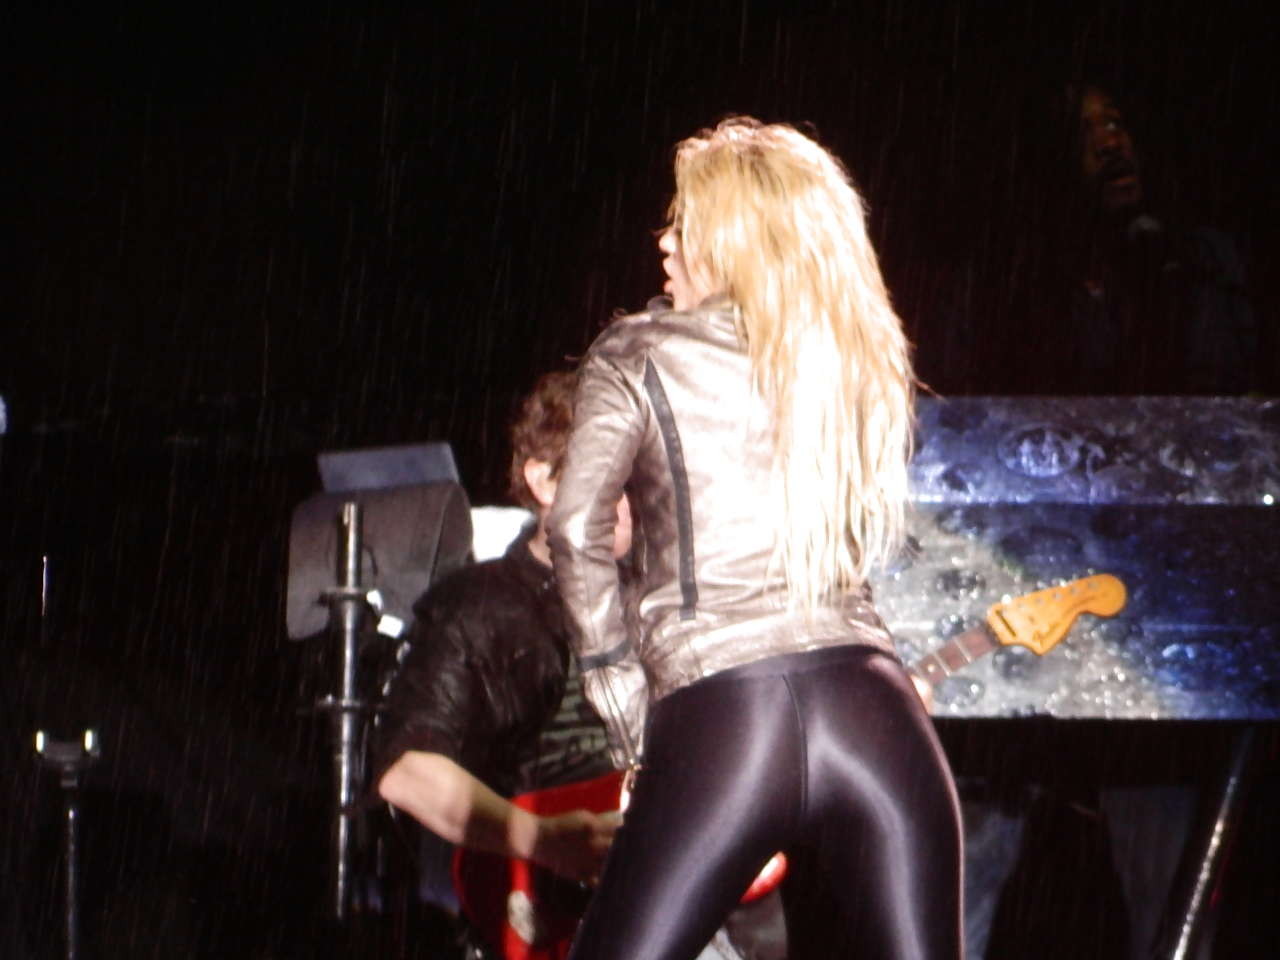 Shakira showing her great ass in latex pants and upskirt paparazzi pictures #75301676